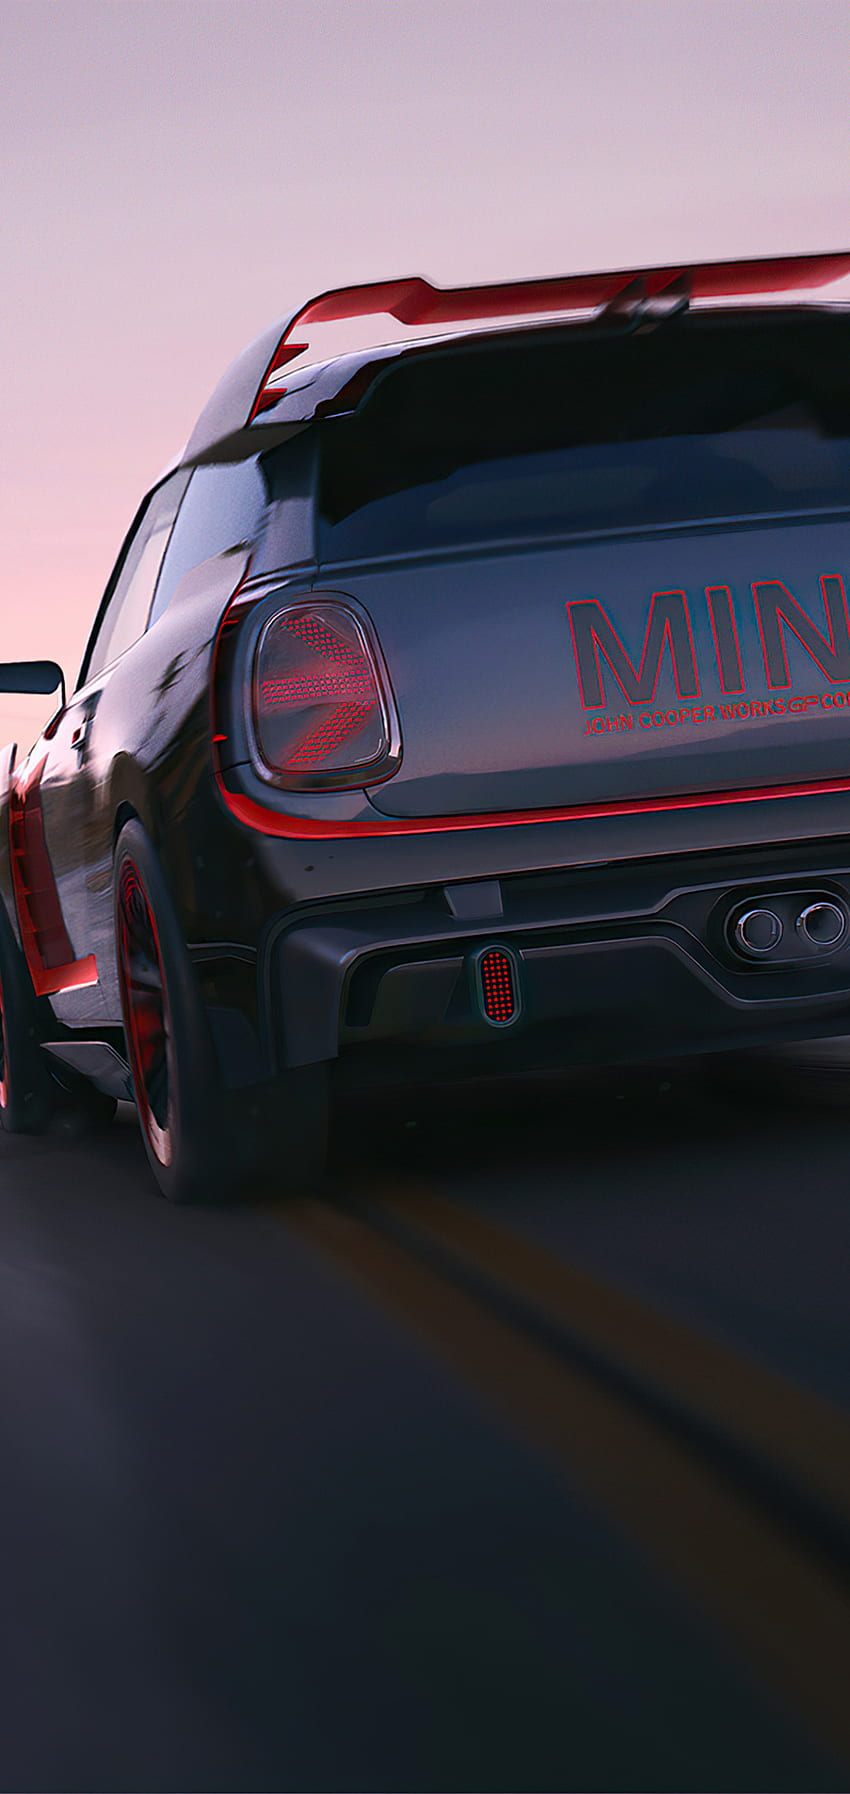 Rebel Racing Mini Cooper One Plus 6, Huawei p20, Honor view 10, Vivo y85, Oppo f7, Xiaomi Mi A2 , , Background, and HD phone wallpaper